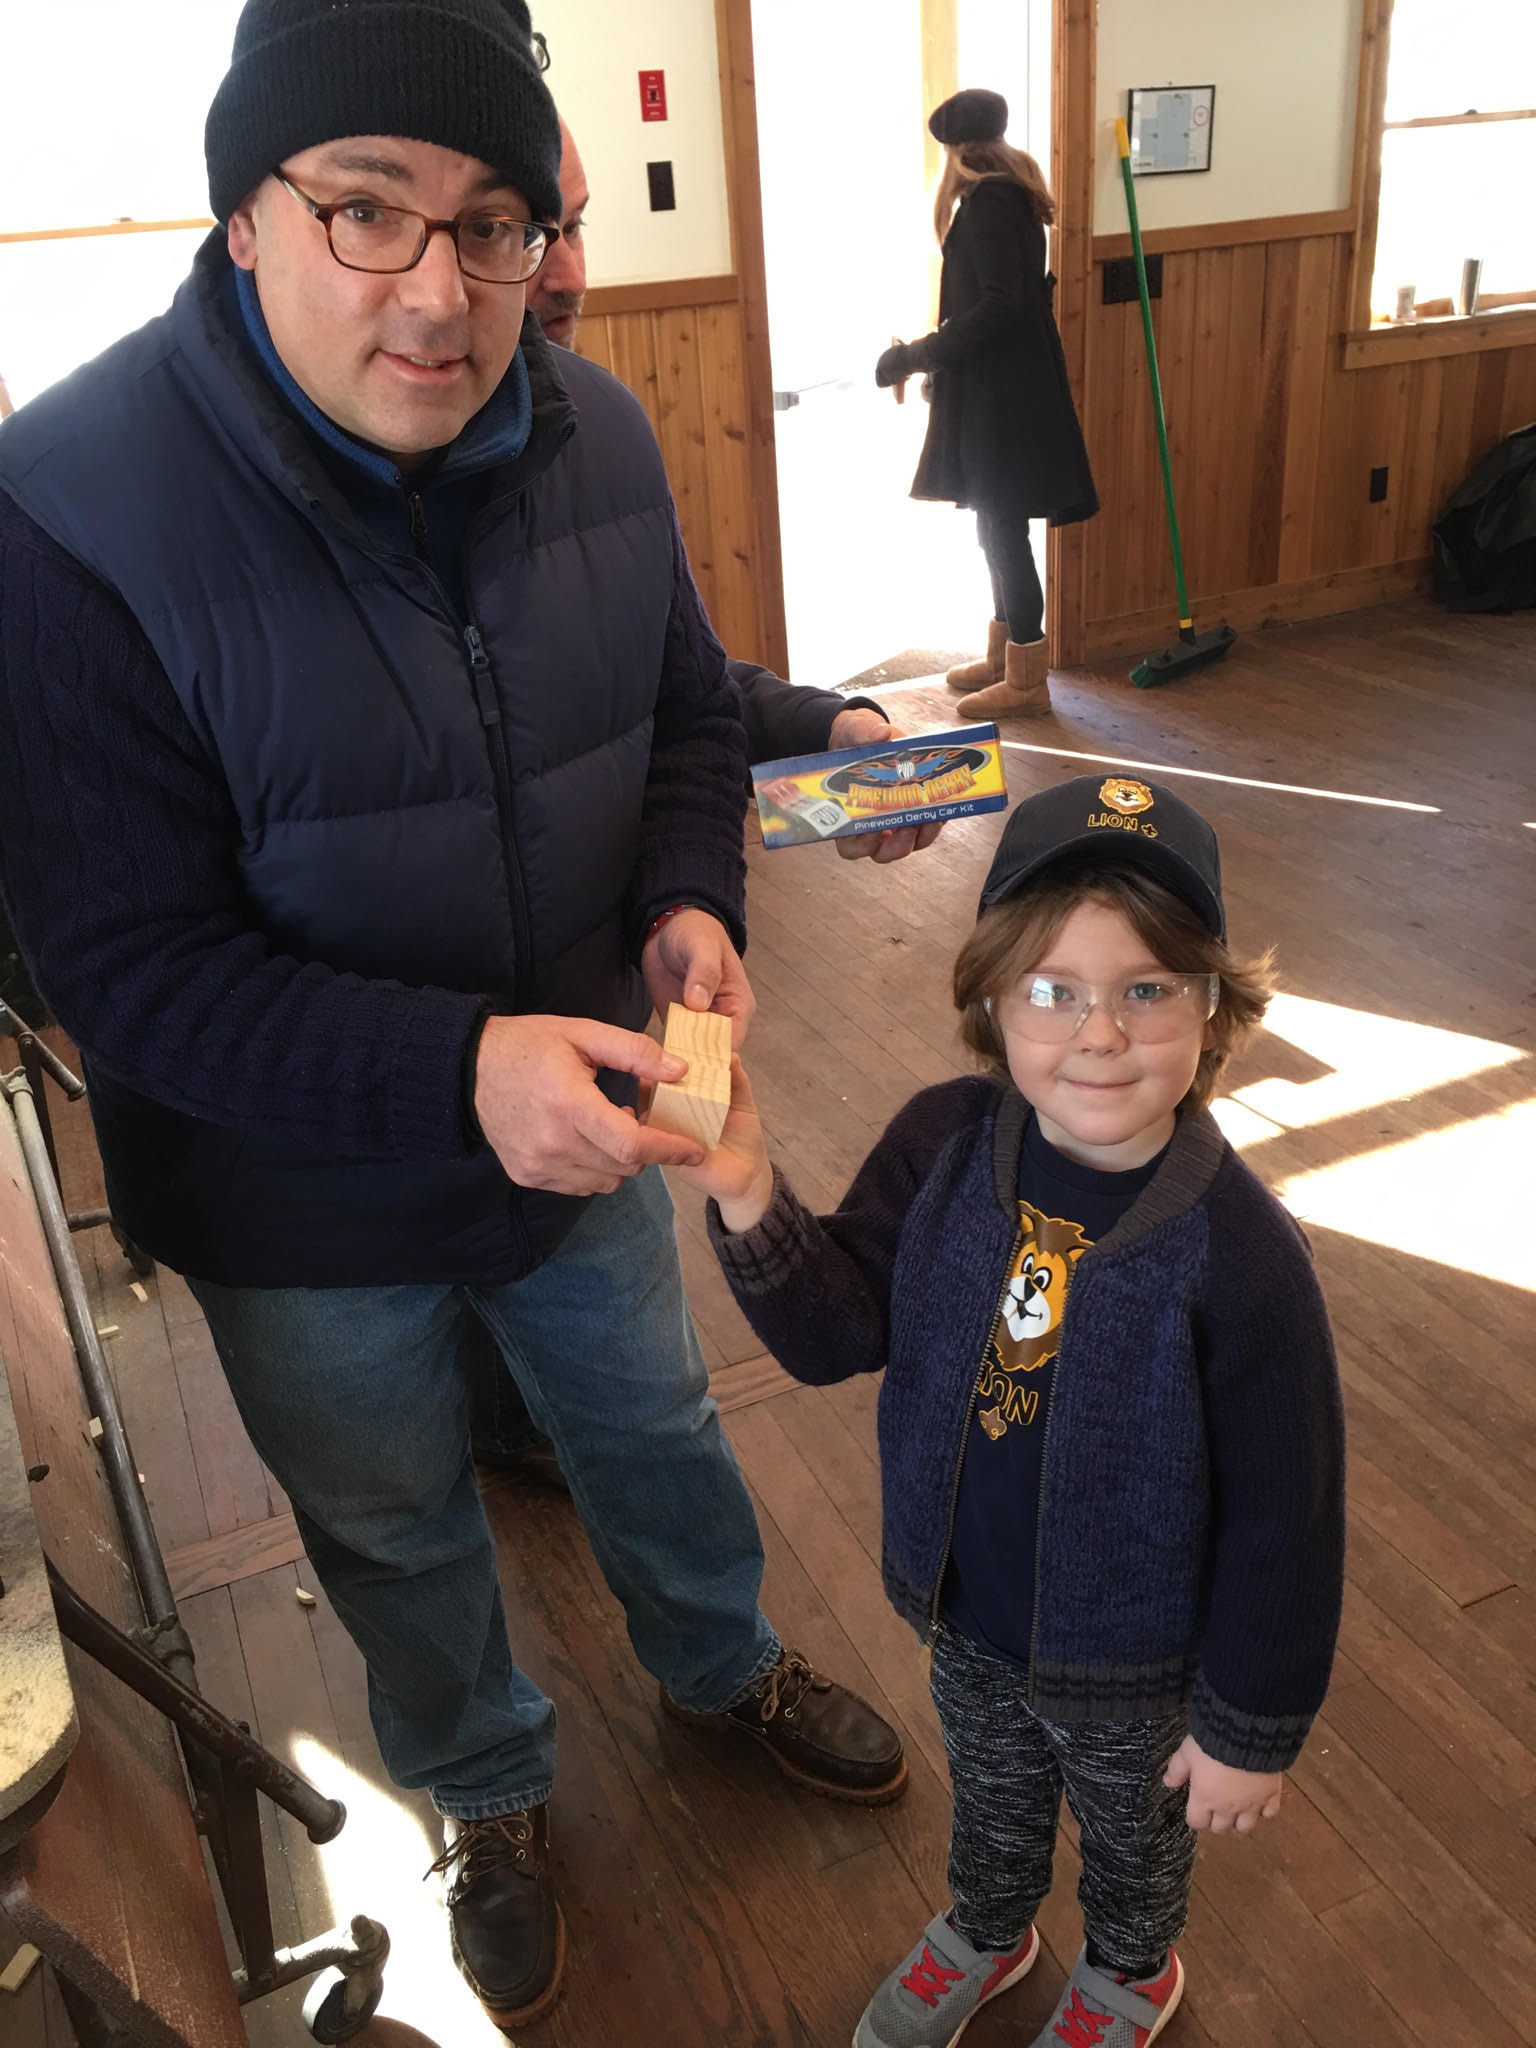 Bob Strassel helping carve tiger cub during a recent Pinewood Derby workshop at Camp Seton. contributed photo